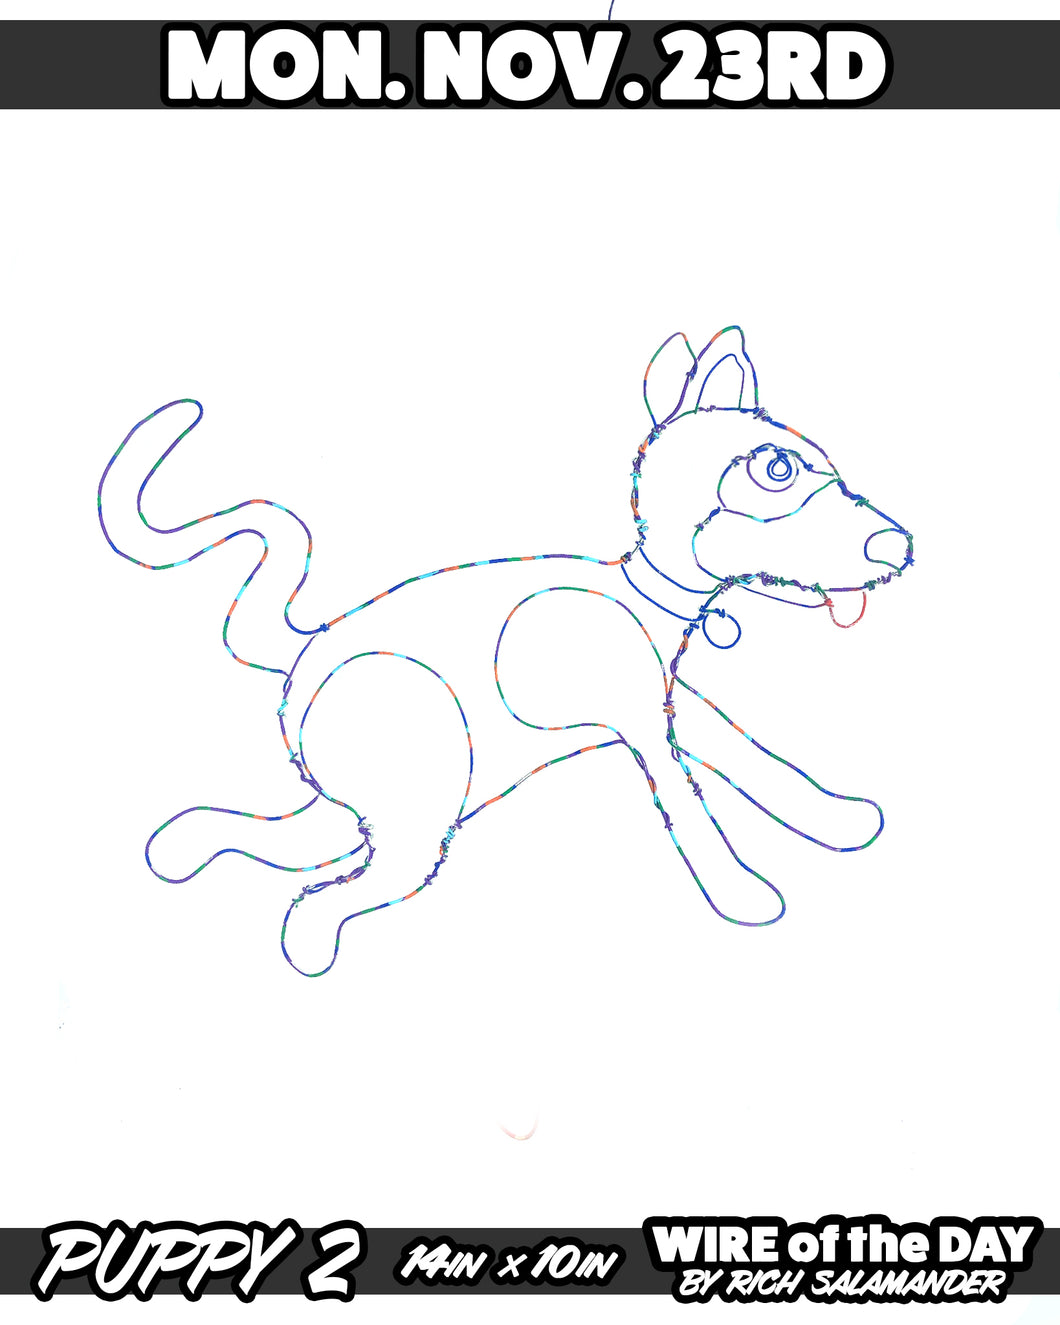 WIRE of the DAY PUPPY 2